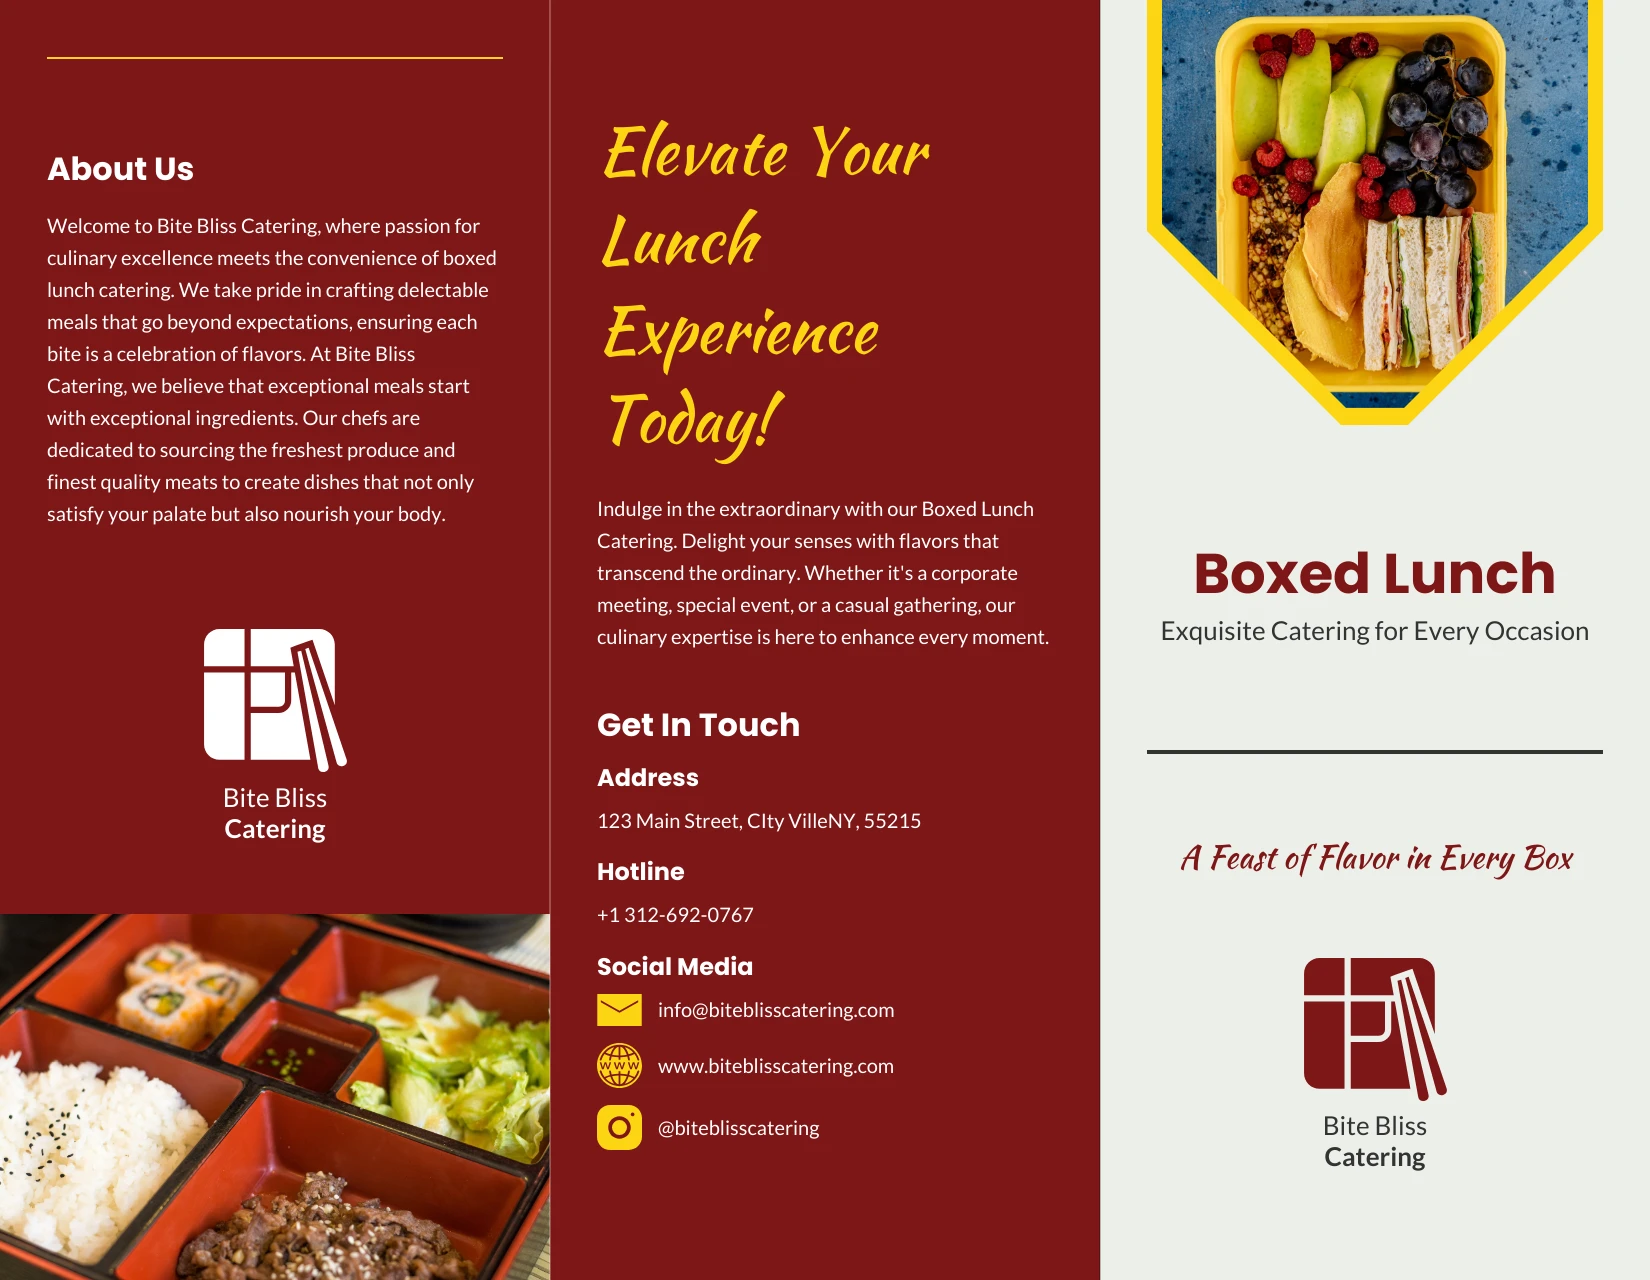 Executive Box Lunch - Exquisite Catering